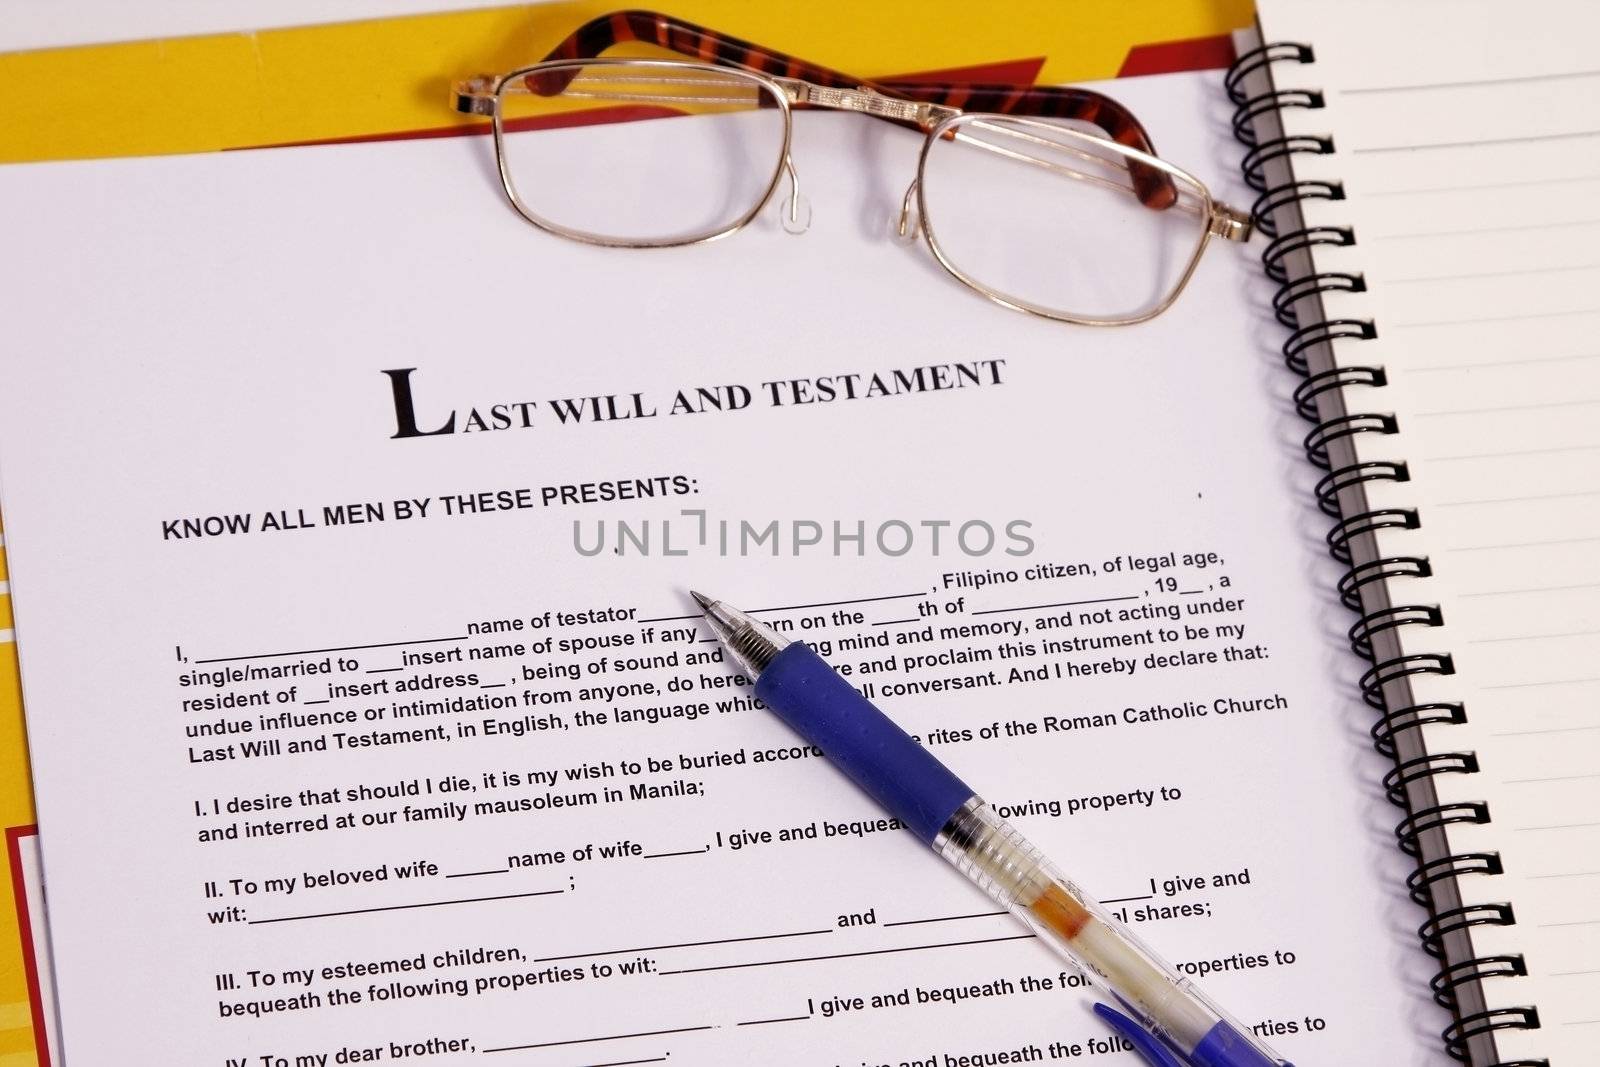 last will and testament form with notebook and pen.
